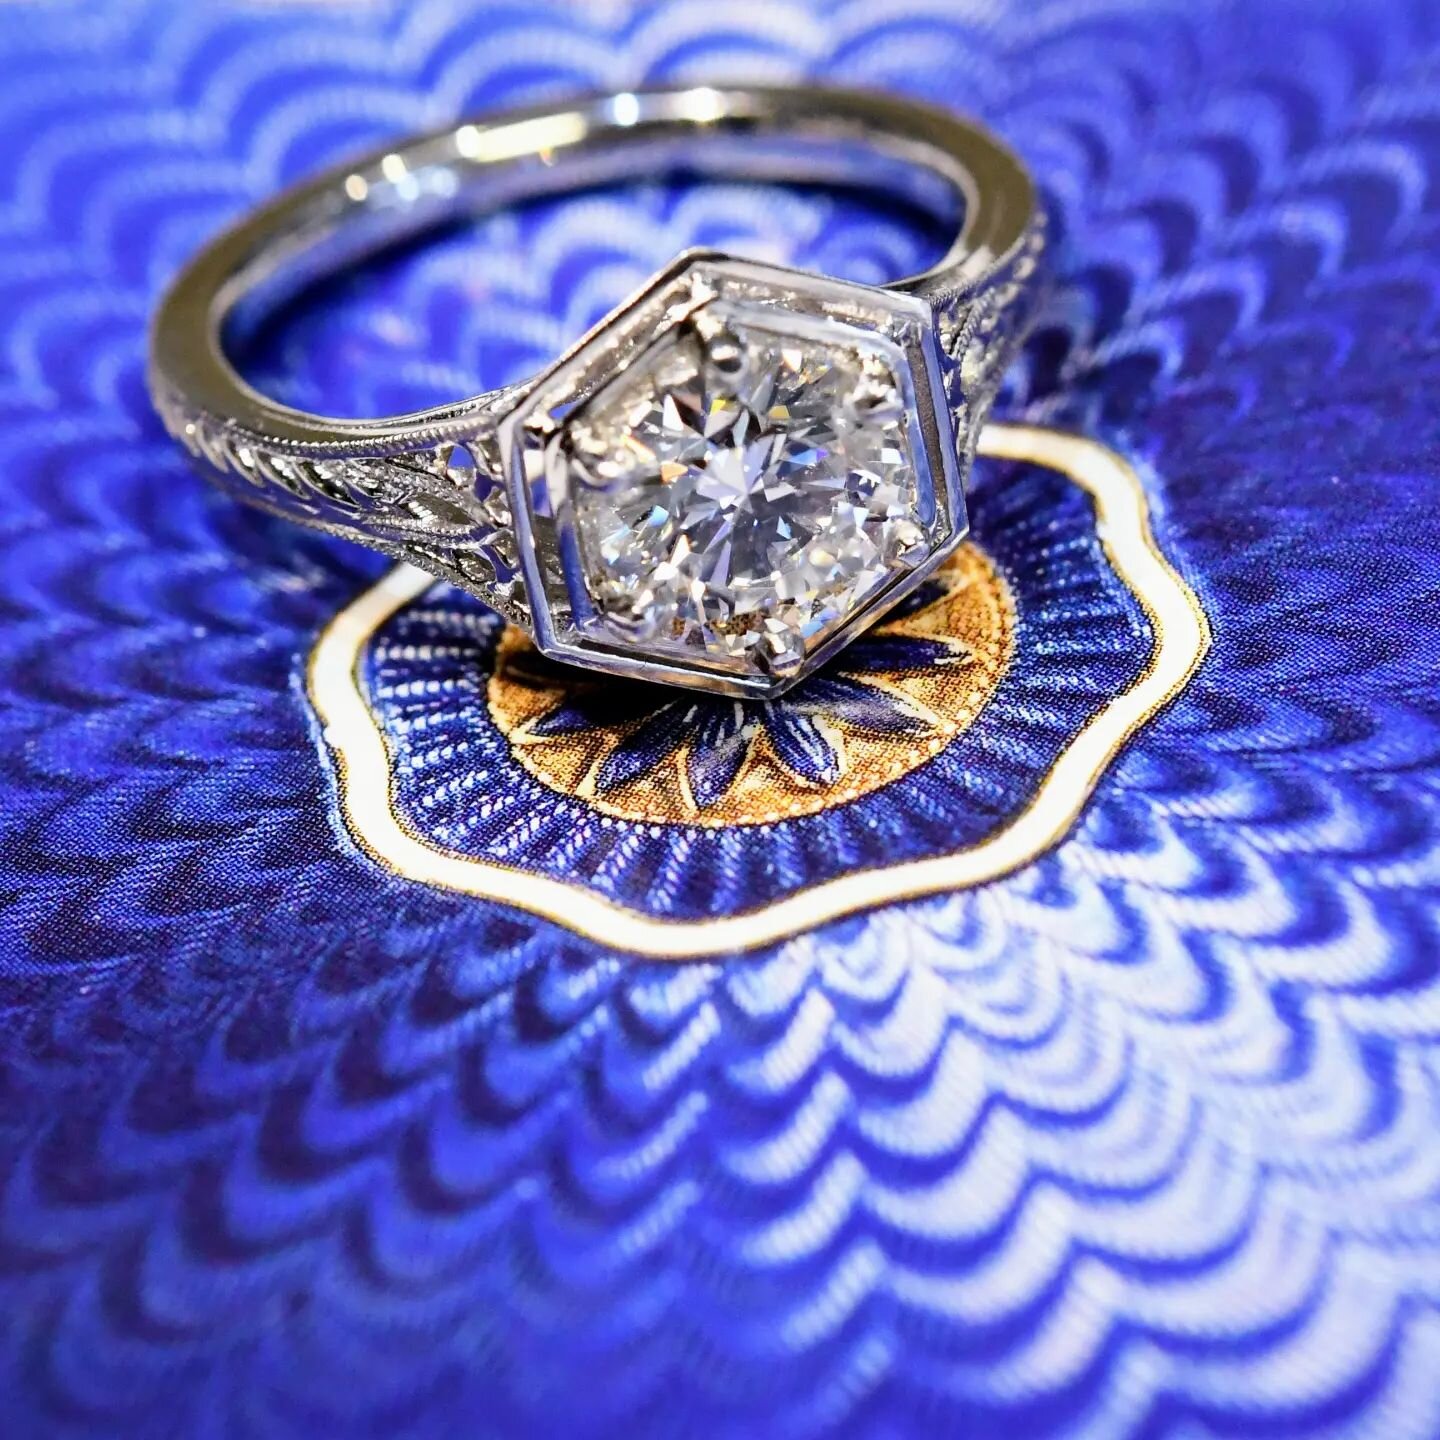 Making a new ring drawn from #vintagejewelry inspiration, 3D printed and set with a #labgrowndiamond is a satisfying bridge exploring a century of jewelry making.